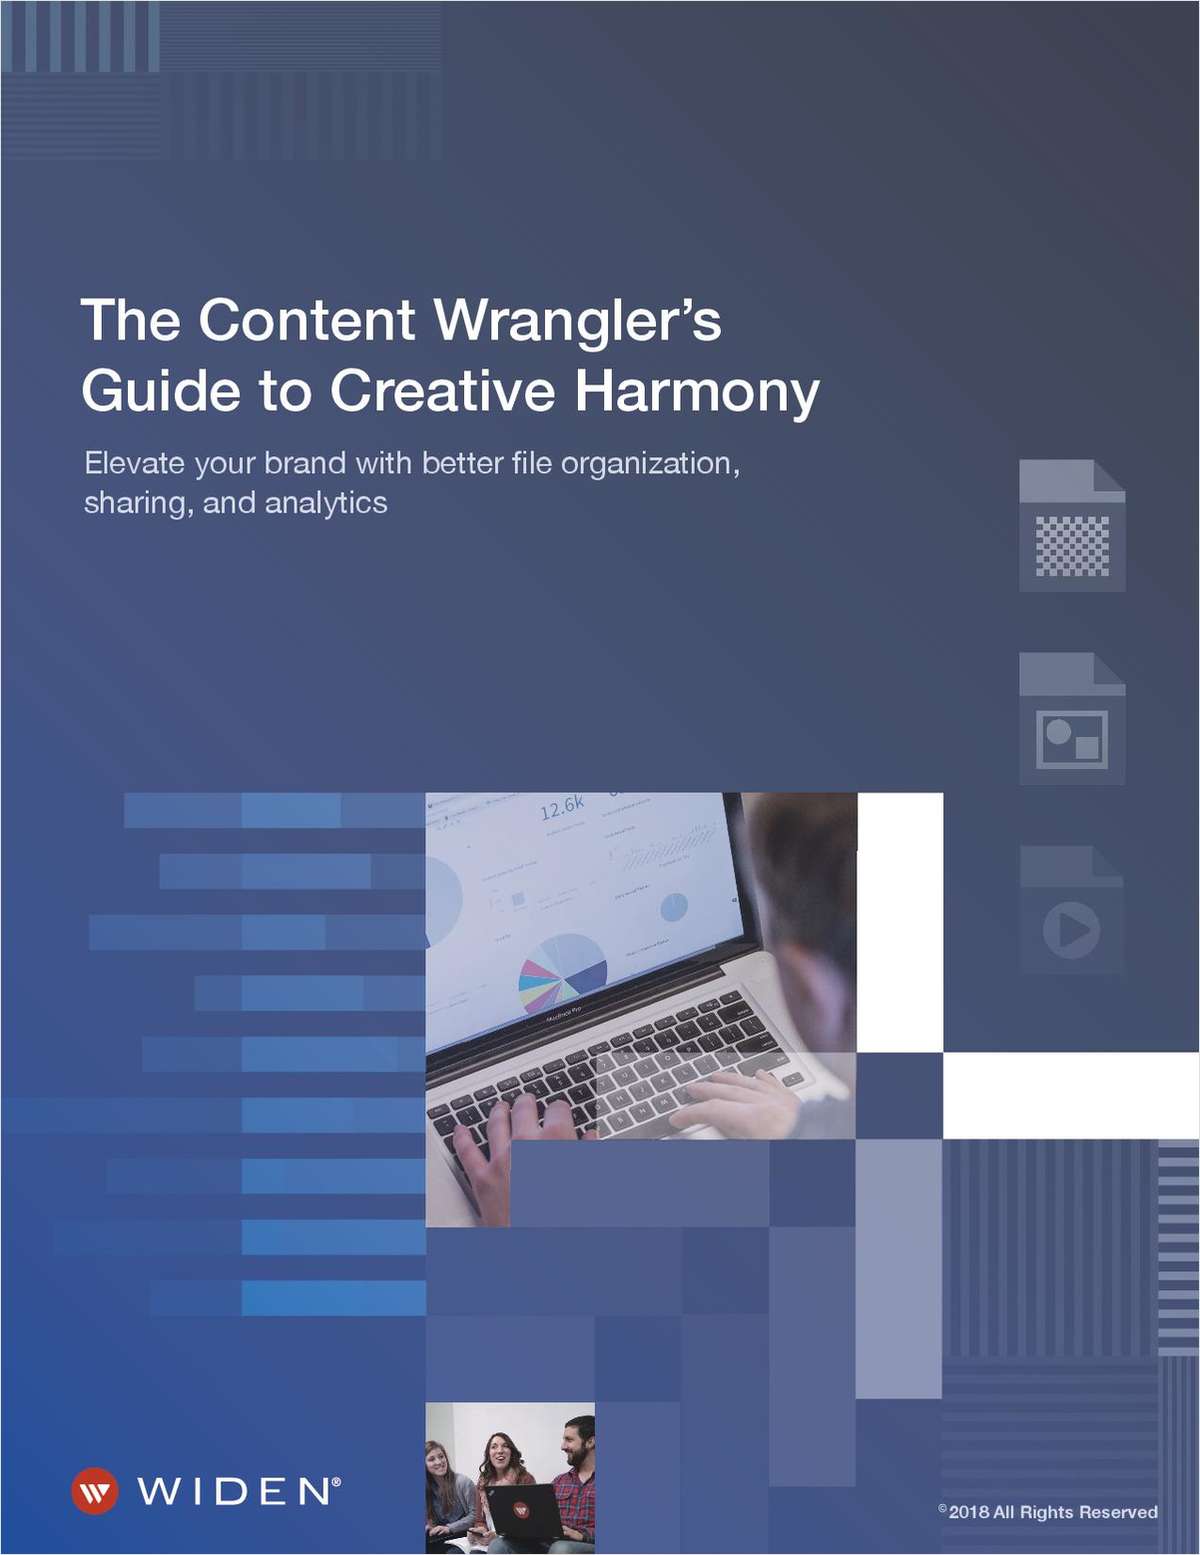 The Content Wrangler's Guide to Creative Harmony